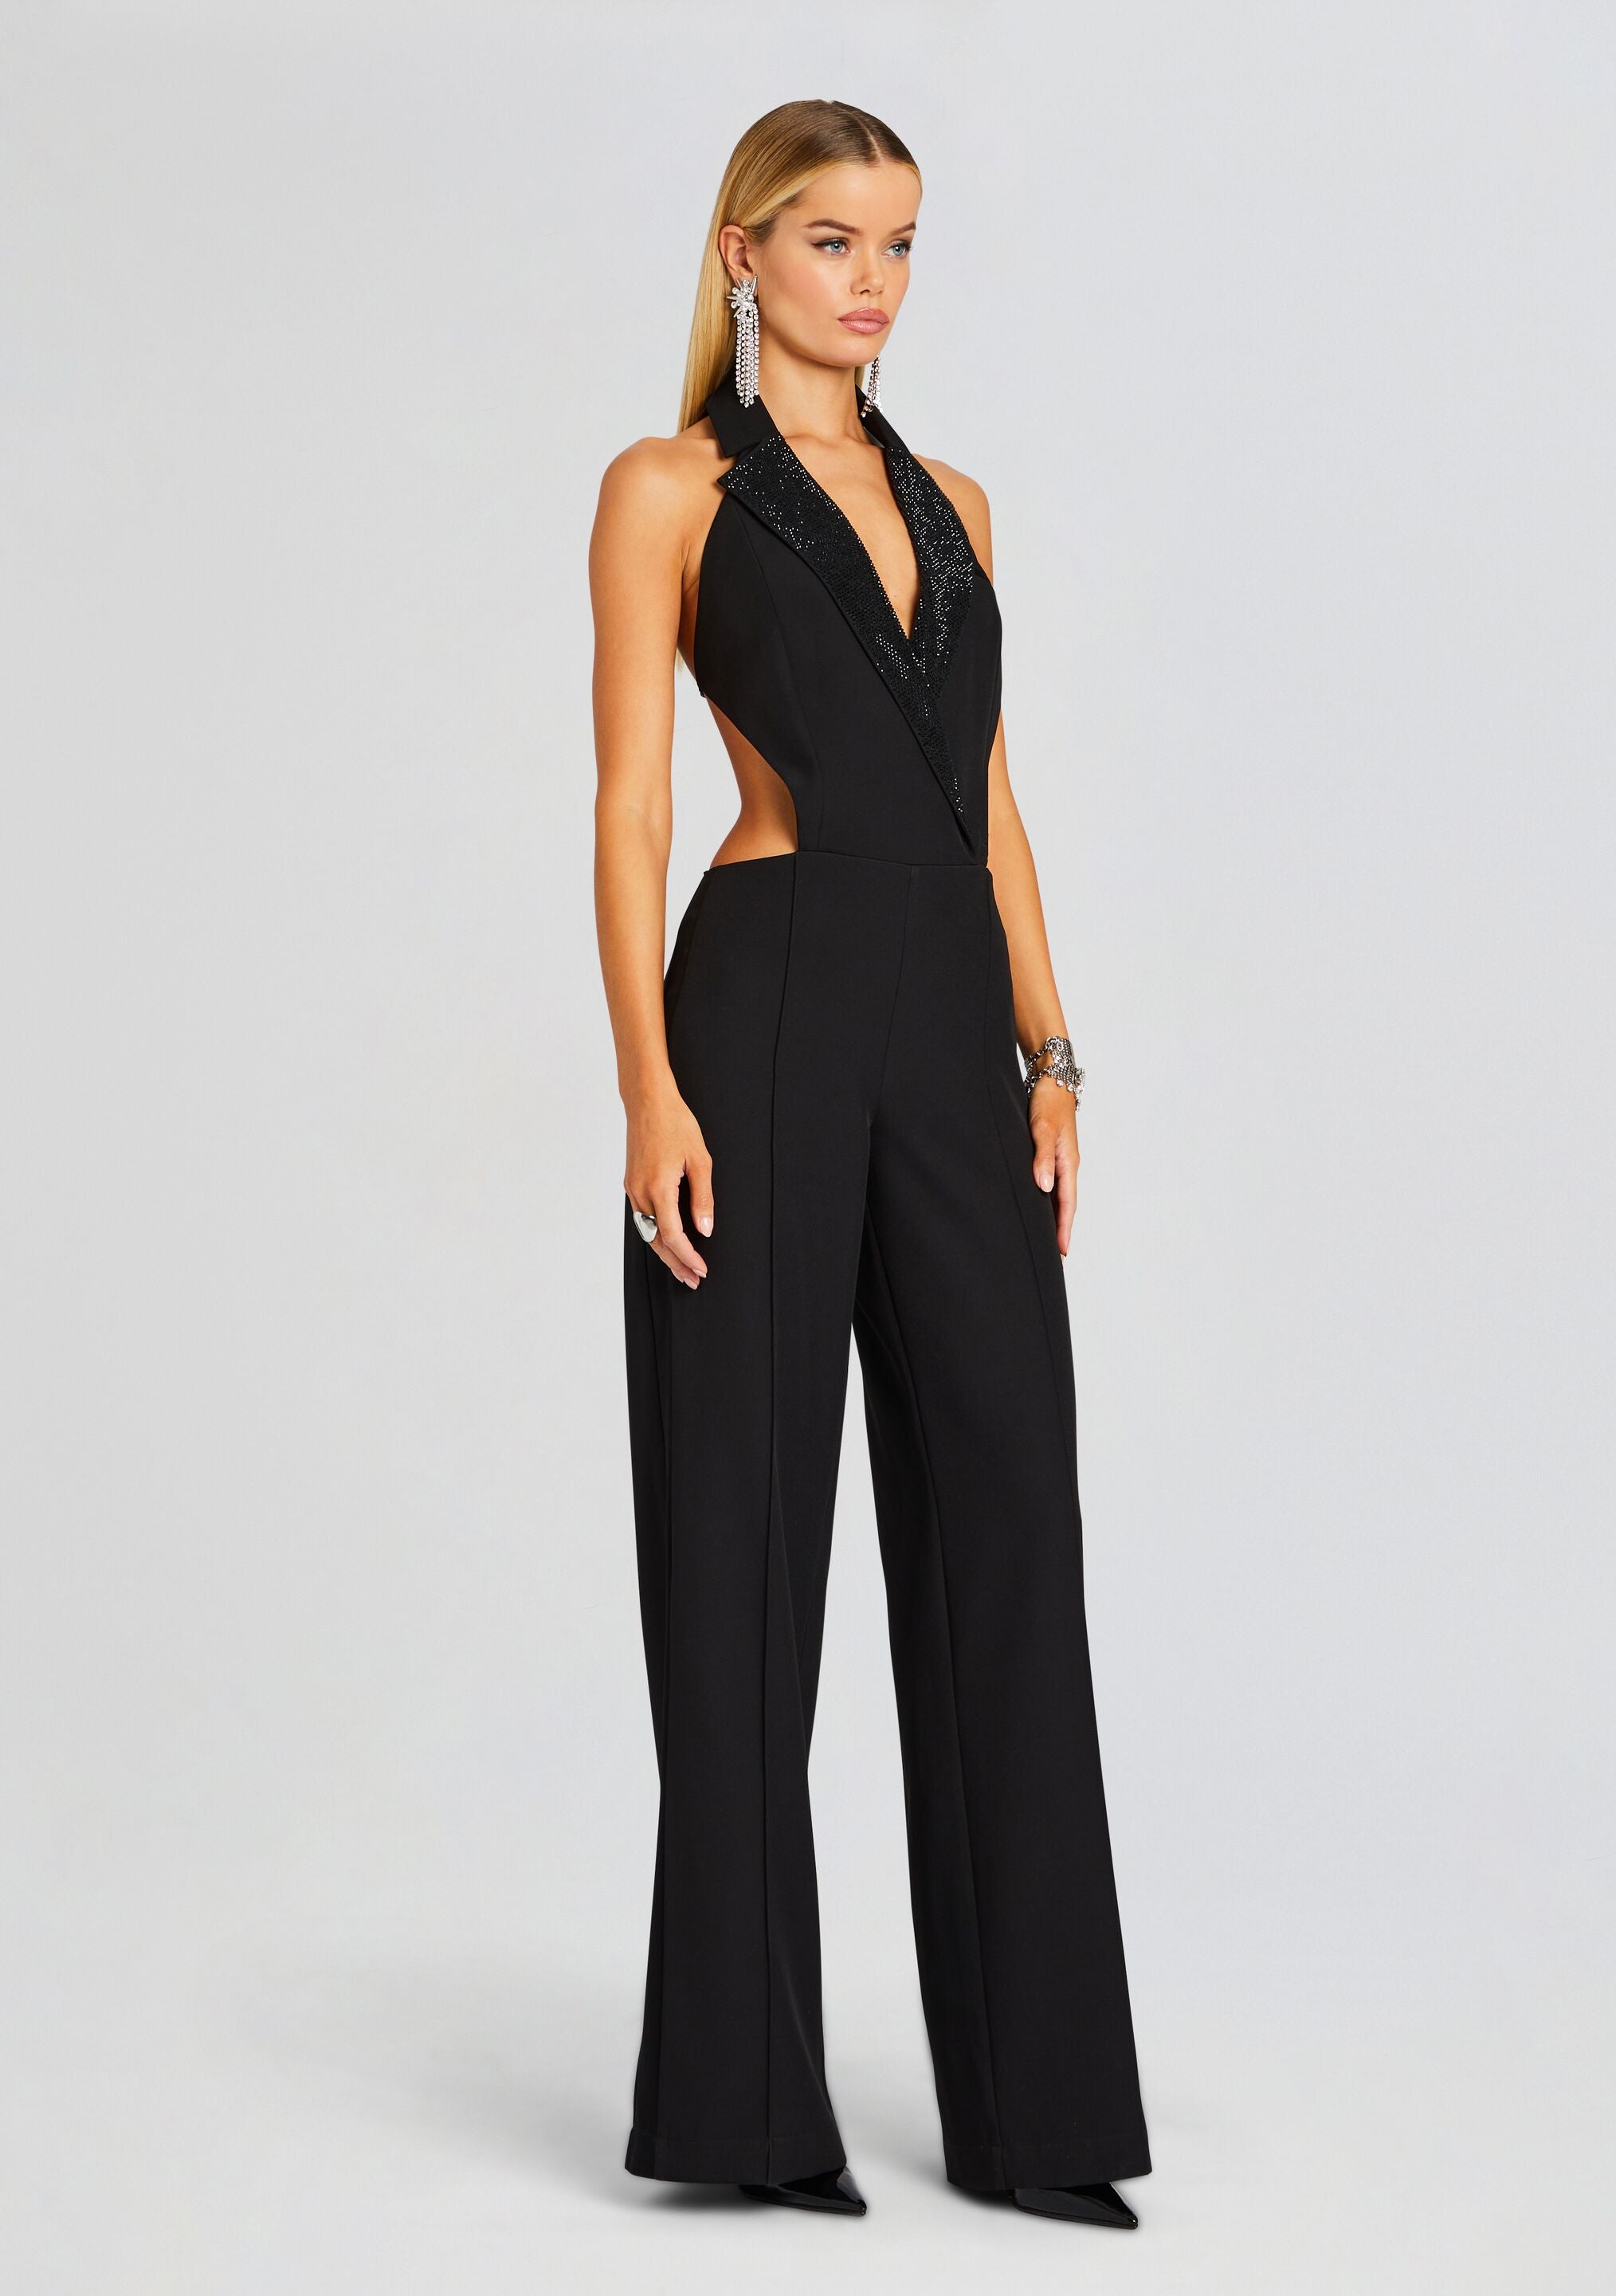 Sexy Woman Jumpsuit Outfit | Jumpsuites Womens Outfits | Jumpsuits Women  Sexy - Women - Aliexpress